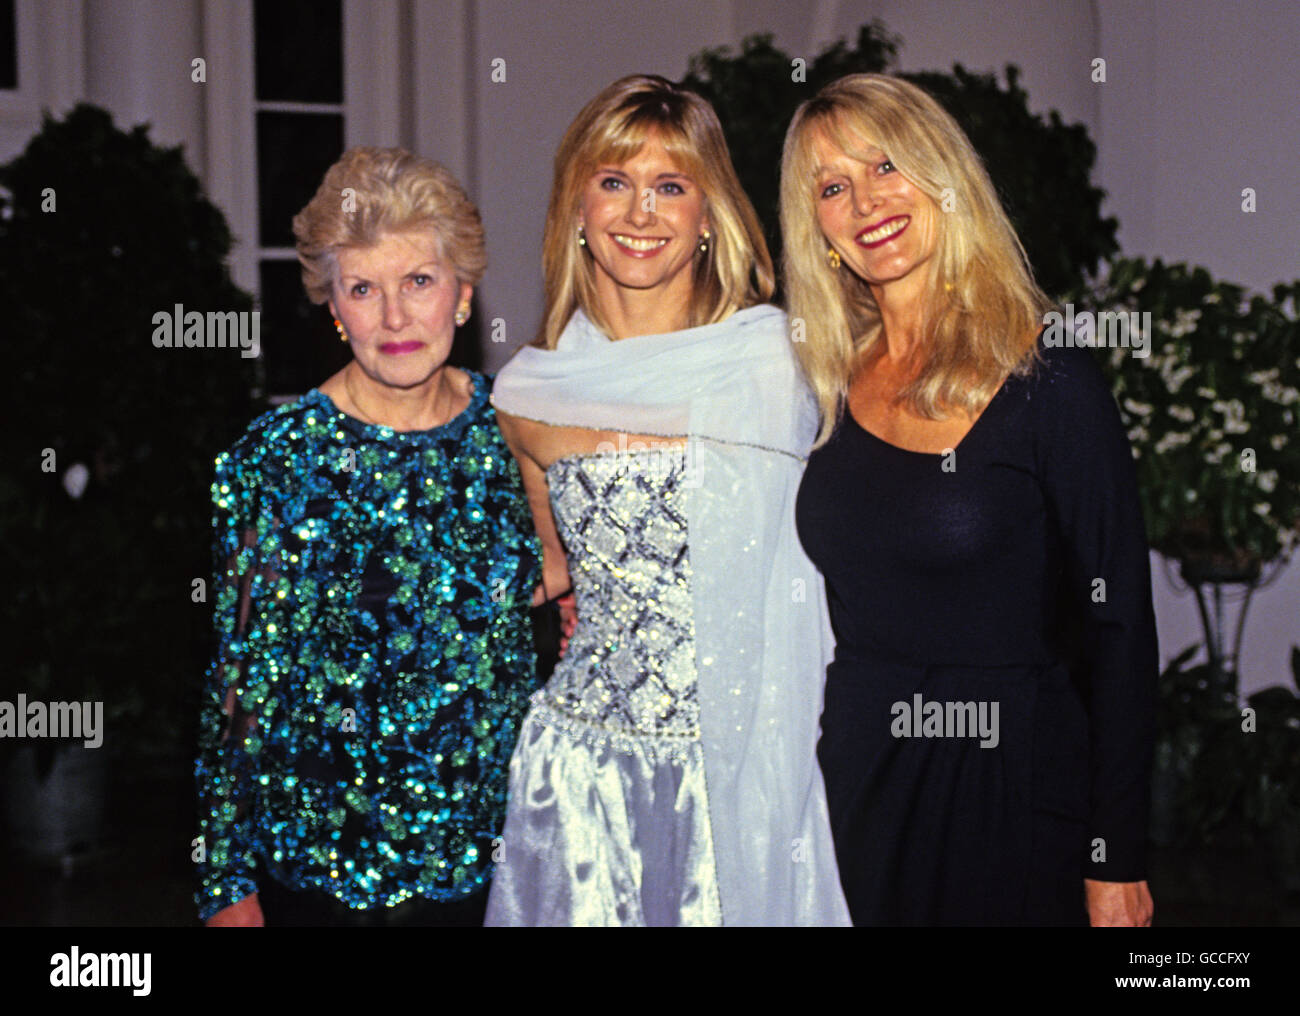 Washington, District of Columbia, USA. 22nd Oct, 1991. Australian singer, songwriter and actress Olivia Newton-John, center, arrives for the State Dinner hosted by United States President George H.W. Bush and first lady Barbara Bush honoring President VÃ¡clav Havel of Czechoslovakia at the White House in Washington, DC with her mother, Irene Newton-John, left, and sister, Rona Newton-John, right, on October 22, 1991.Credit: Ron Sachs/CNP © Ron Sachs/CNP/ZUMA Wire/Alamy Live News Stock Photo